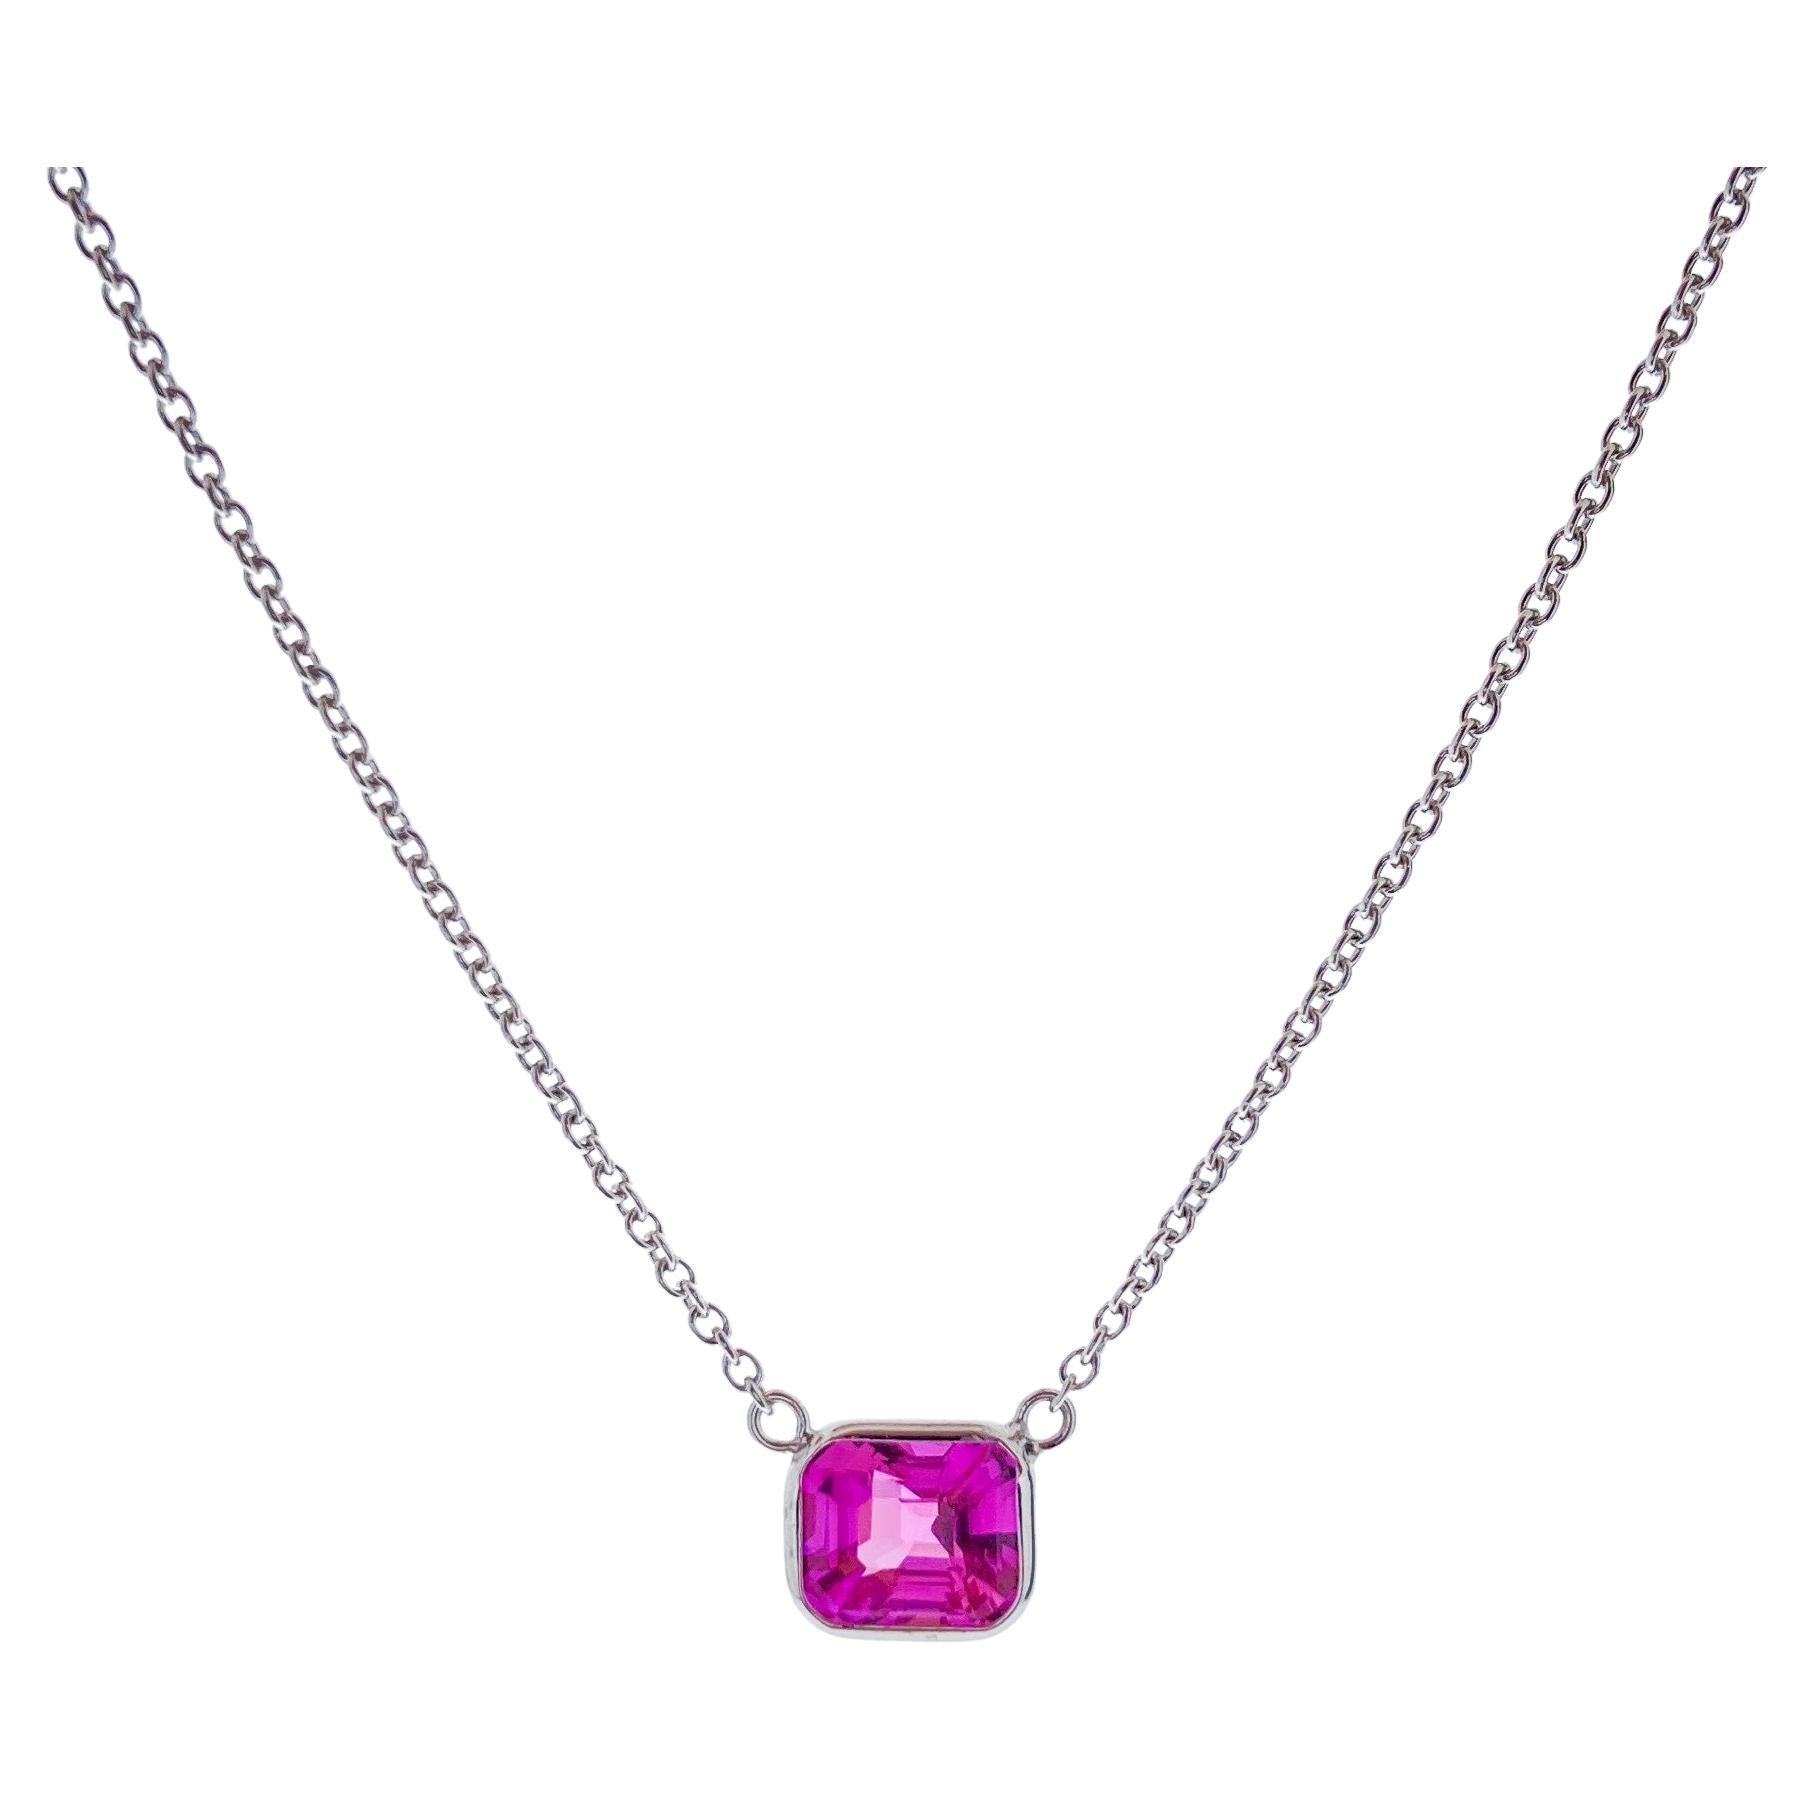 1.60 Carat Emerald Cut Pink Sapphire Fashion Necklaces In 14K White Gold   For Sale